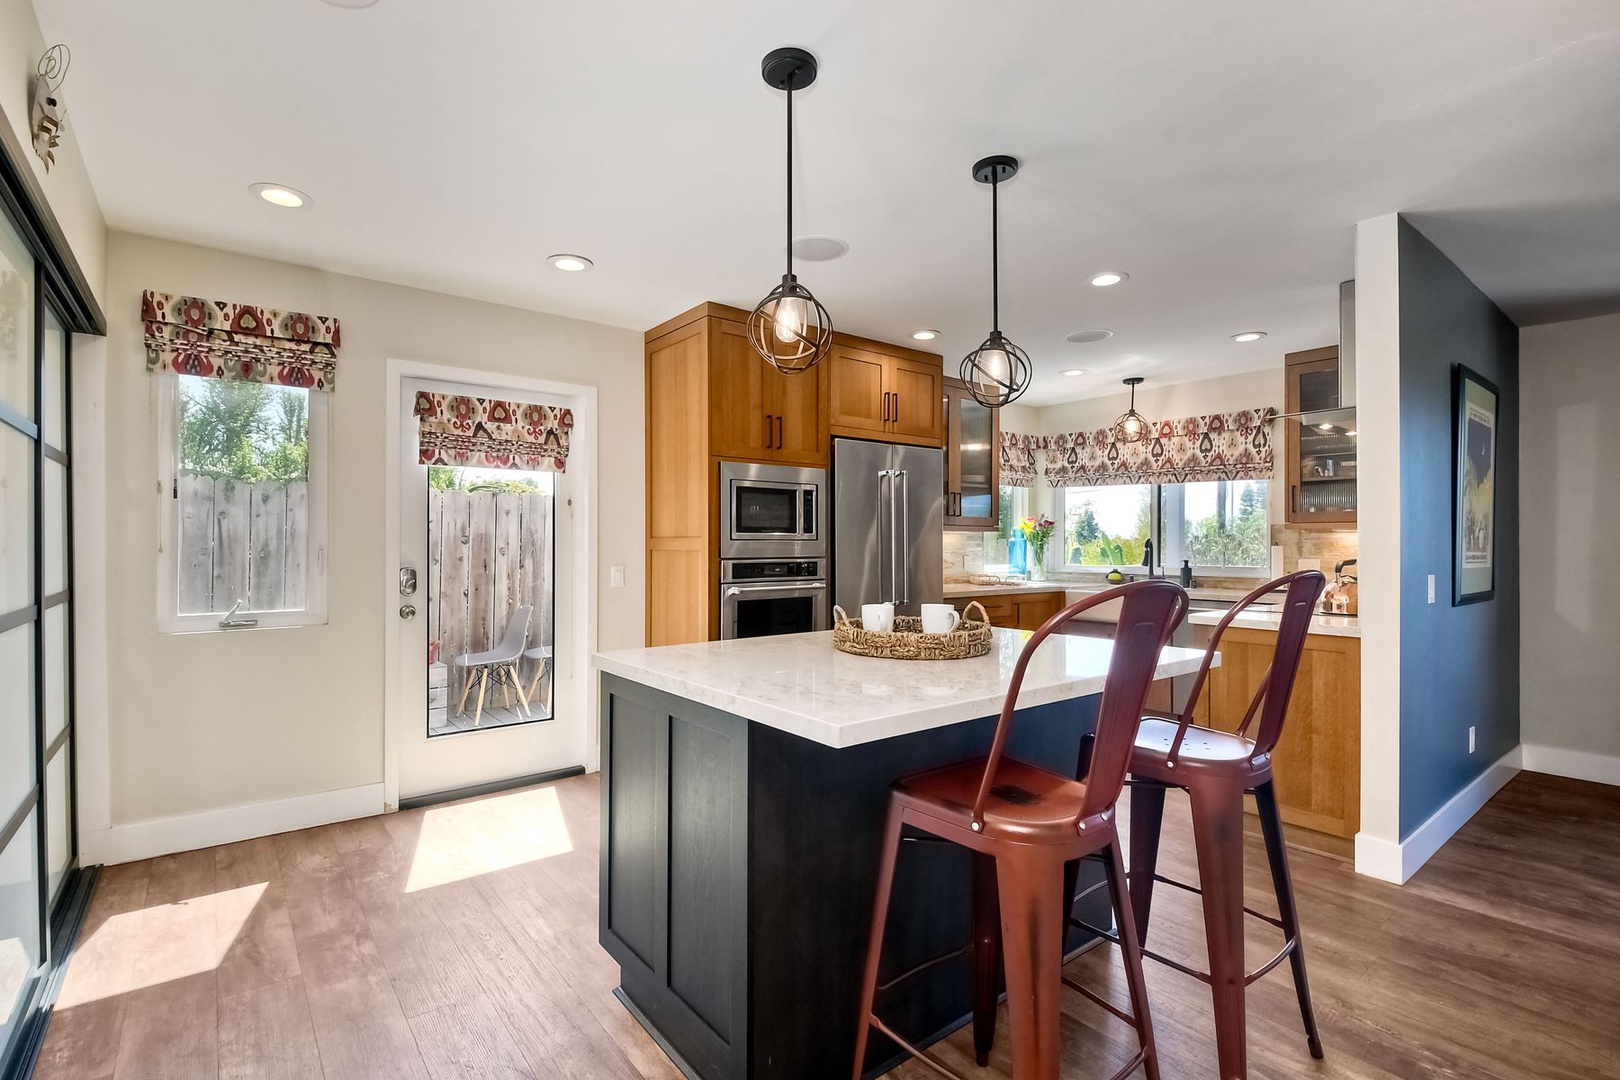 Sip morning coffee or grab a bite at the kitchen island, with seating for 2